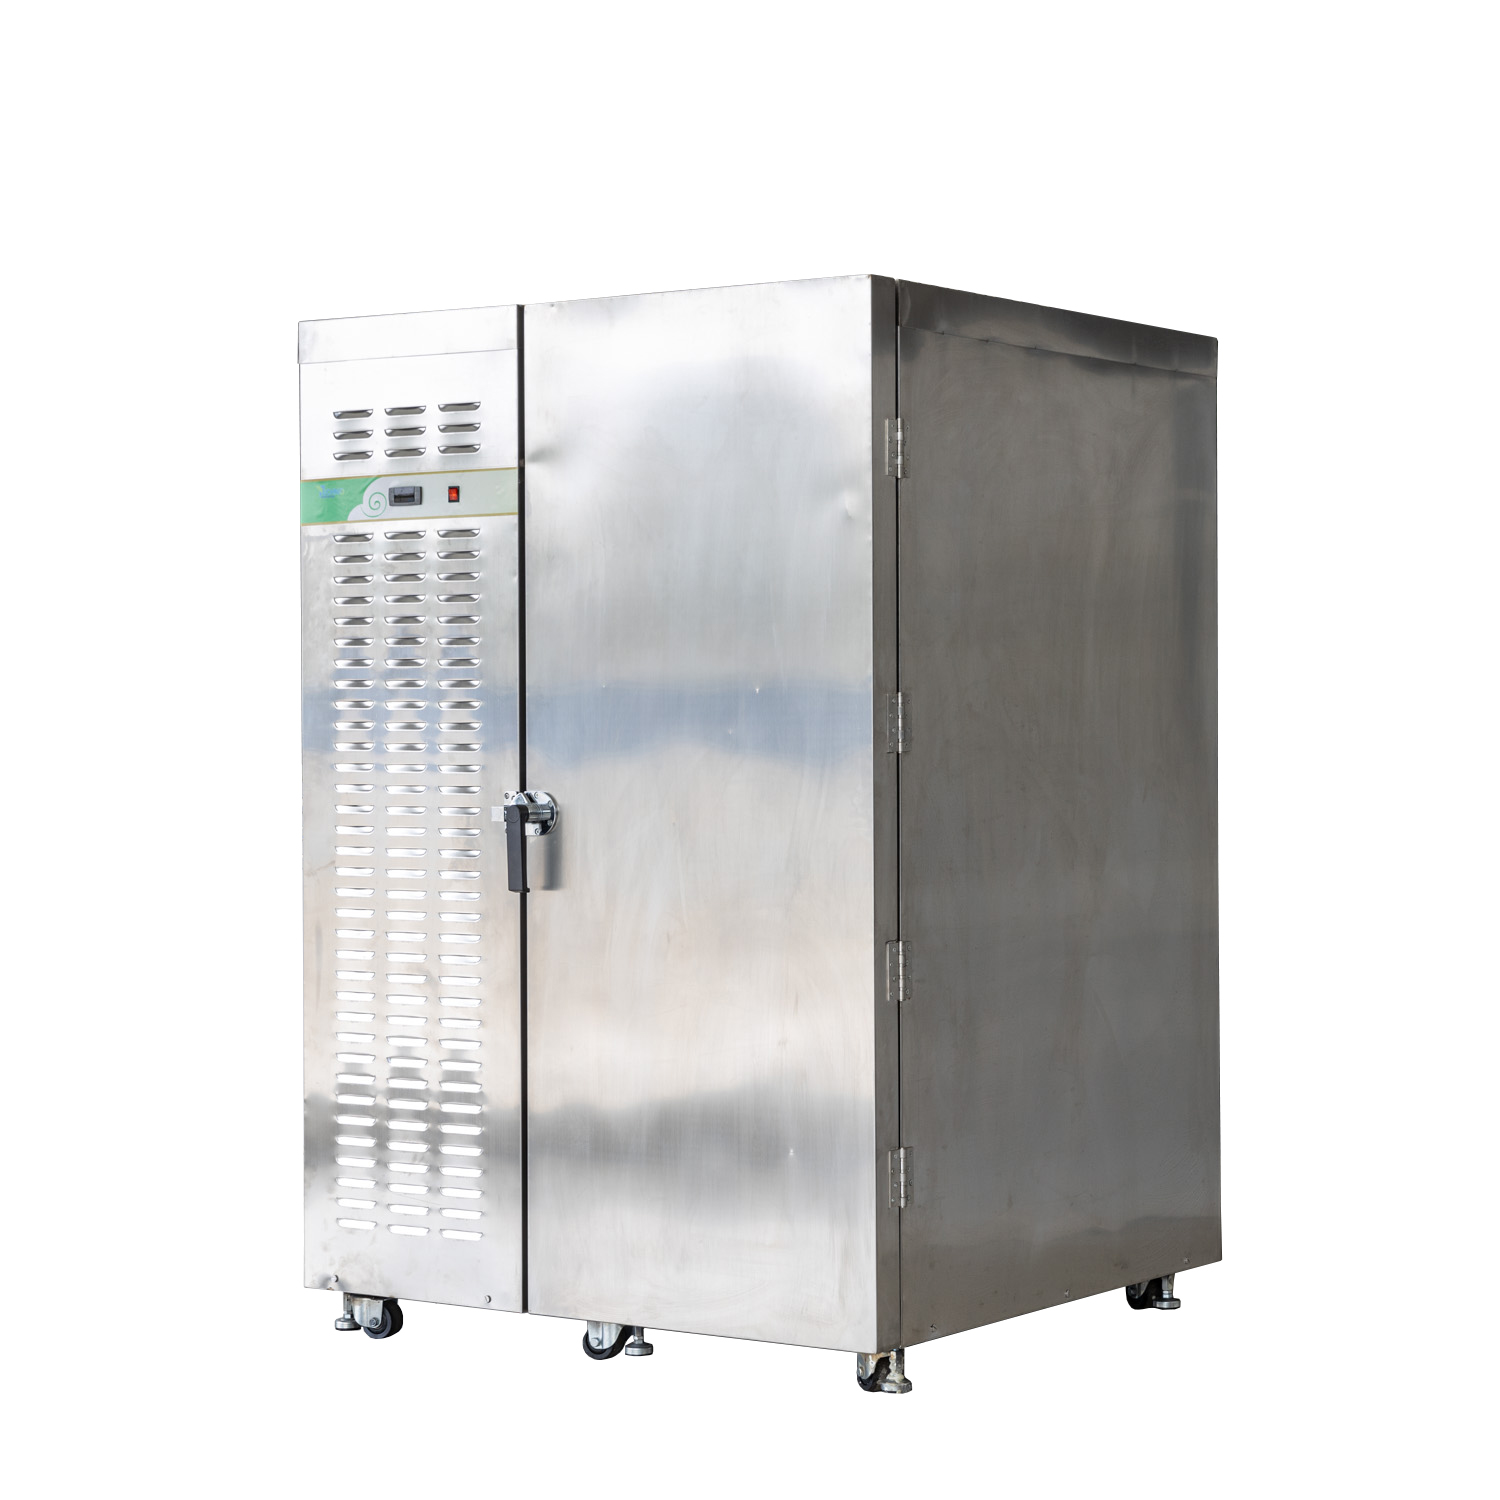 Foster Countertop Blast Chiller for Home